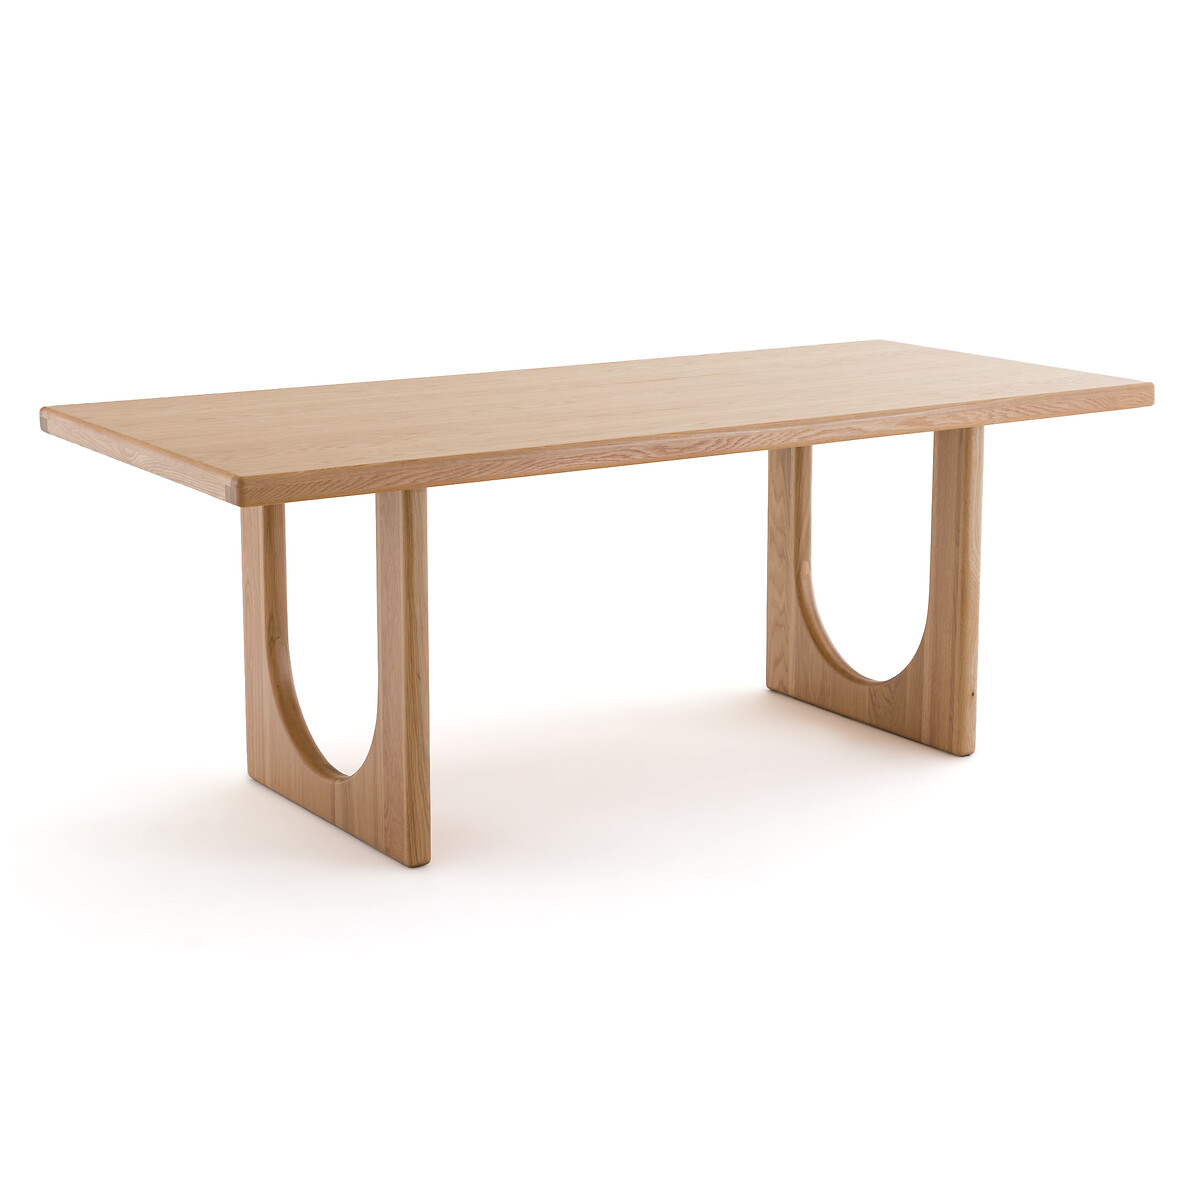 Douve Solid Oak Dining Table (Seats 6-8)